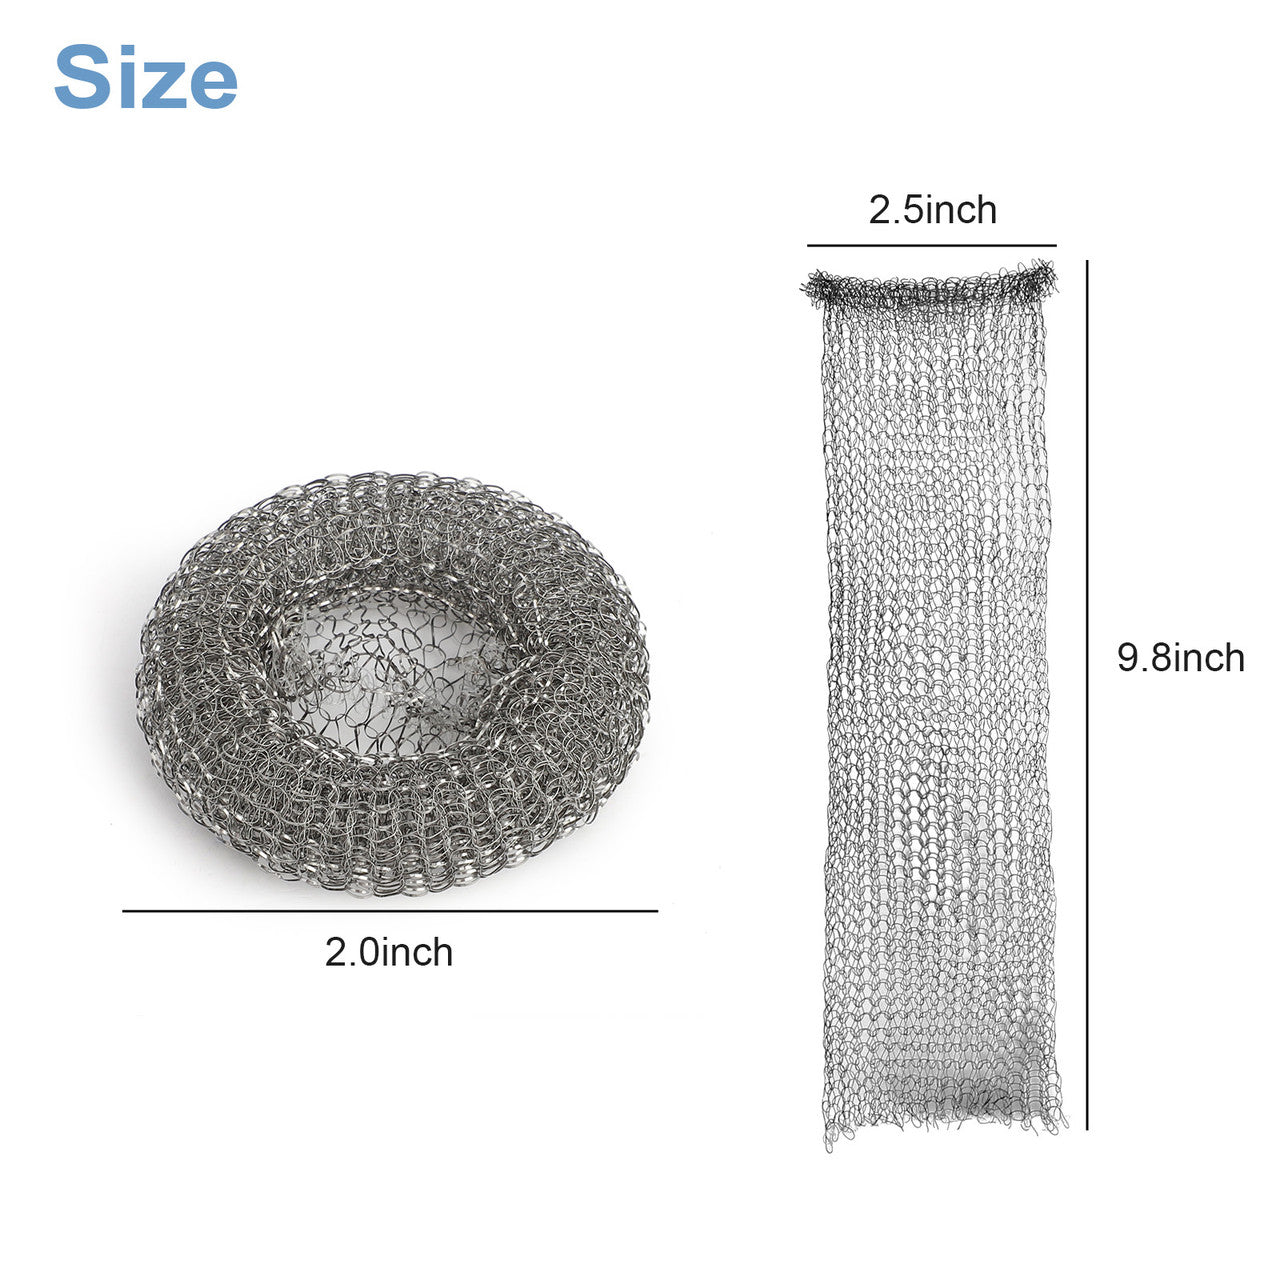 50 PCS Lint Traps Washing Machine Lint Trap Stainless Steel lint Snare Traps Laundry Mesh Washer Hose Filter - Washing Machine Lint Snare;  Lint Traps Hose Screen Filter Catcher with 50 Nylon Cable Ties